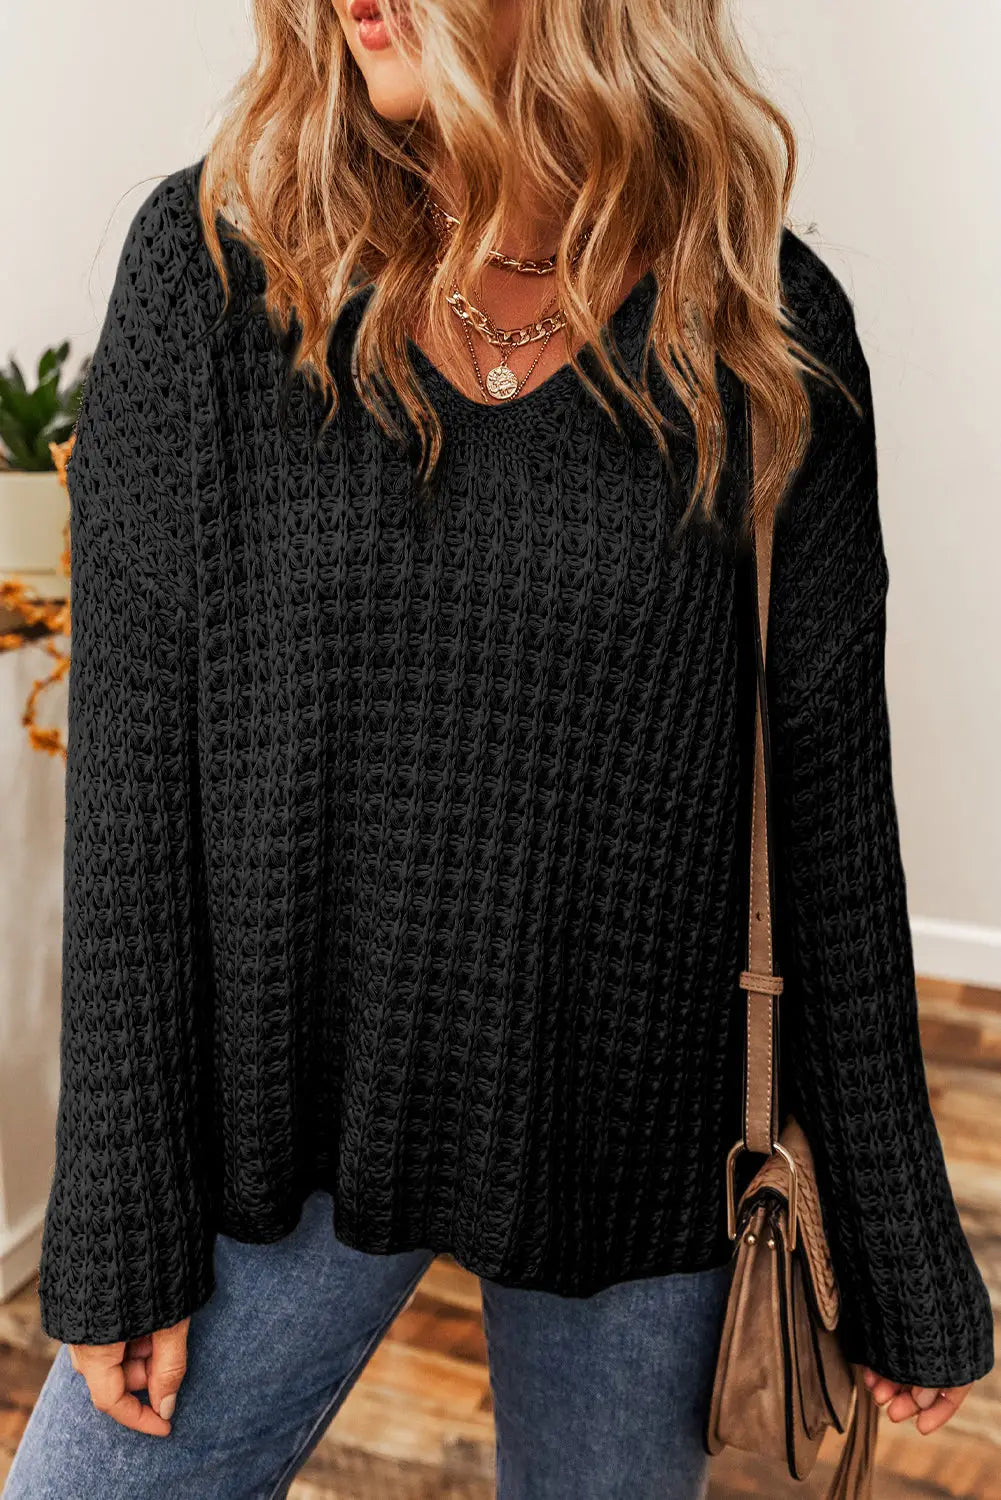 Black hollow-out crochet v neck sweater - s / 100% acrylic - sweaters & cardigans